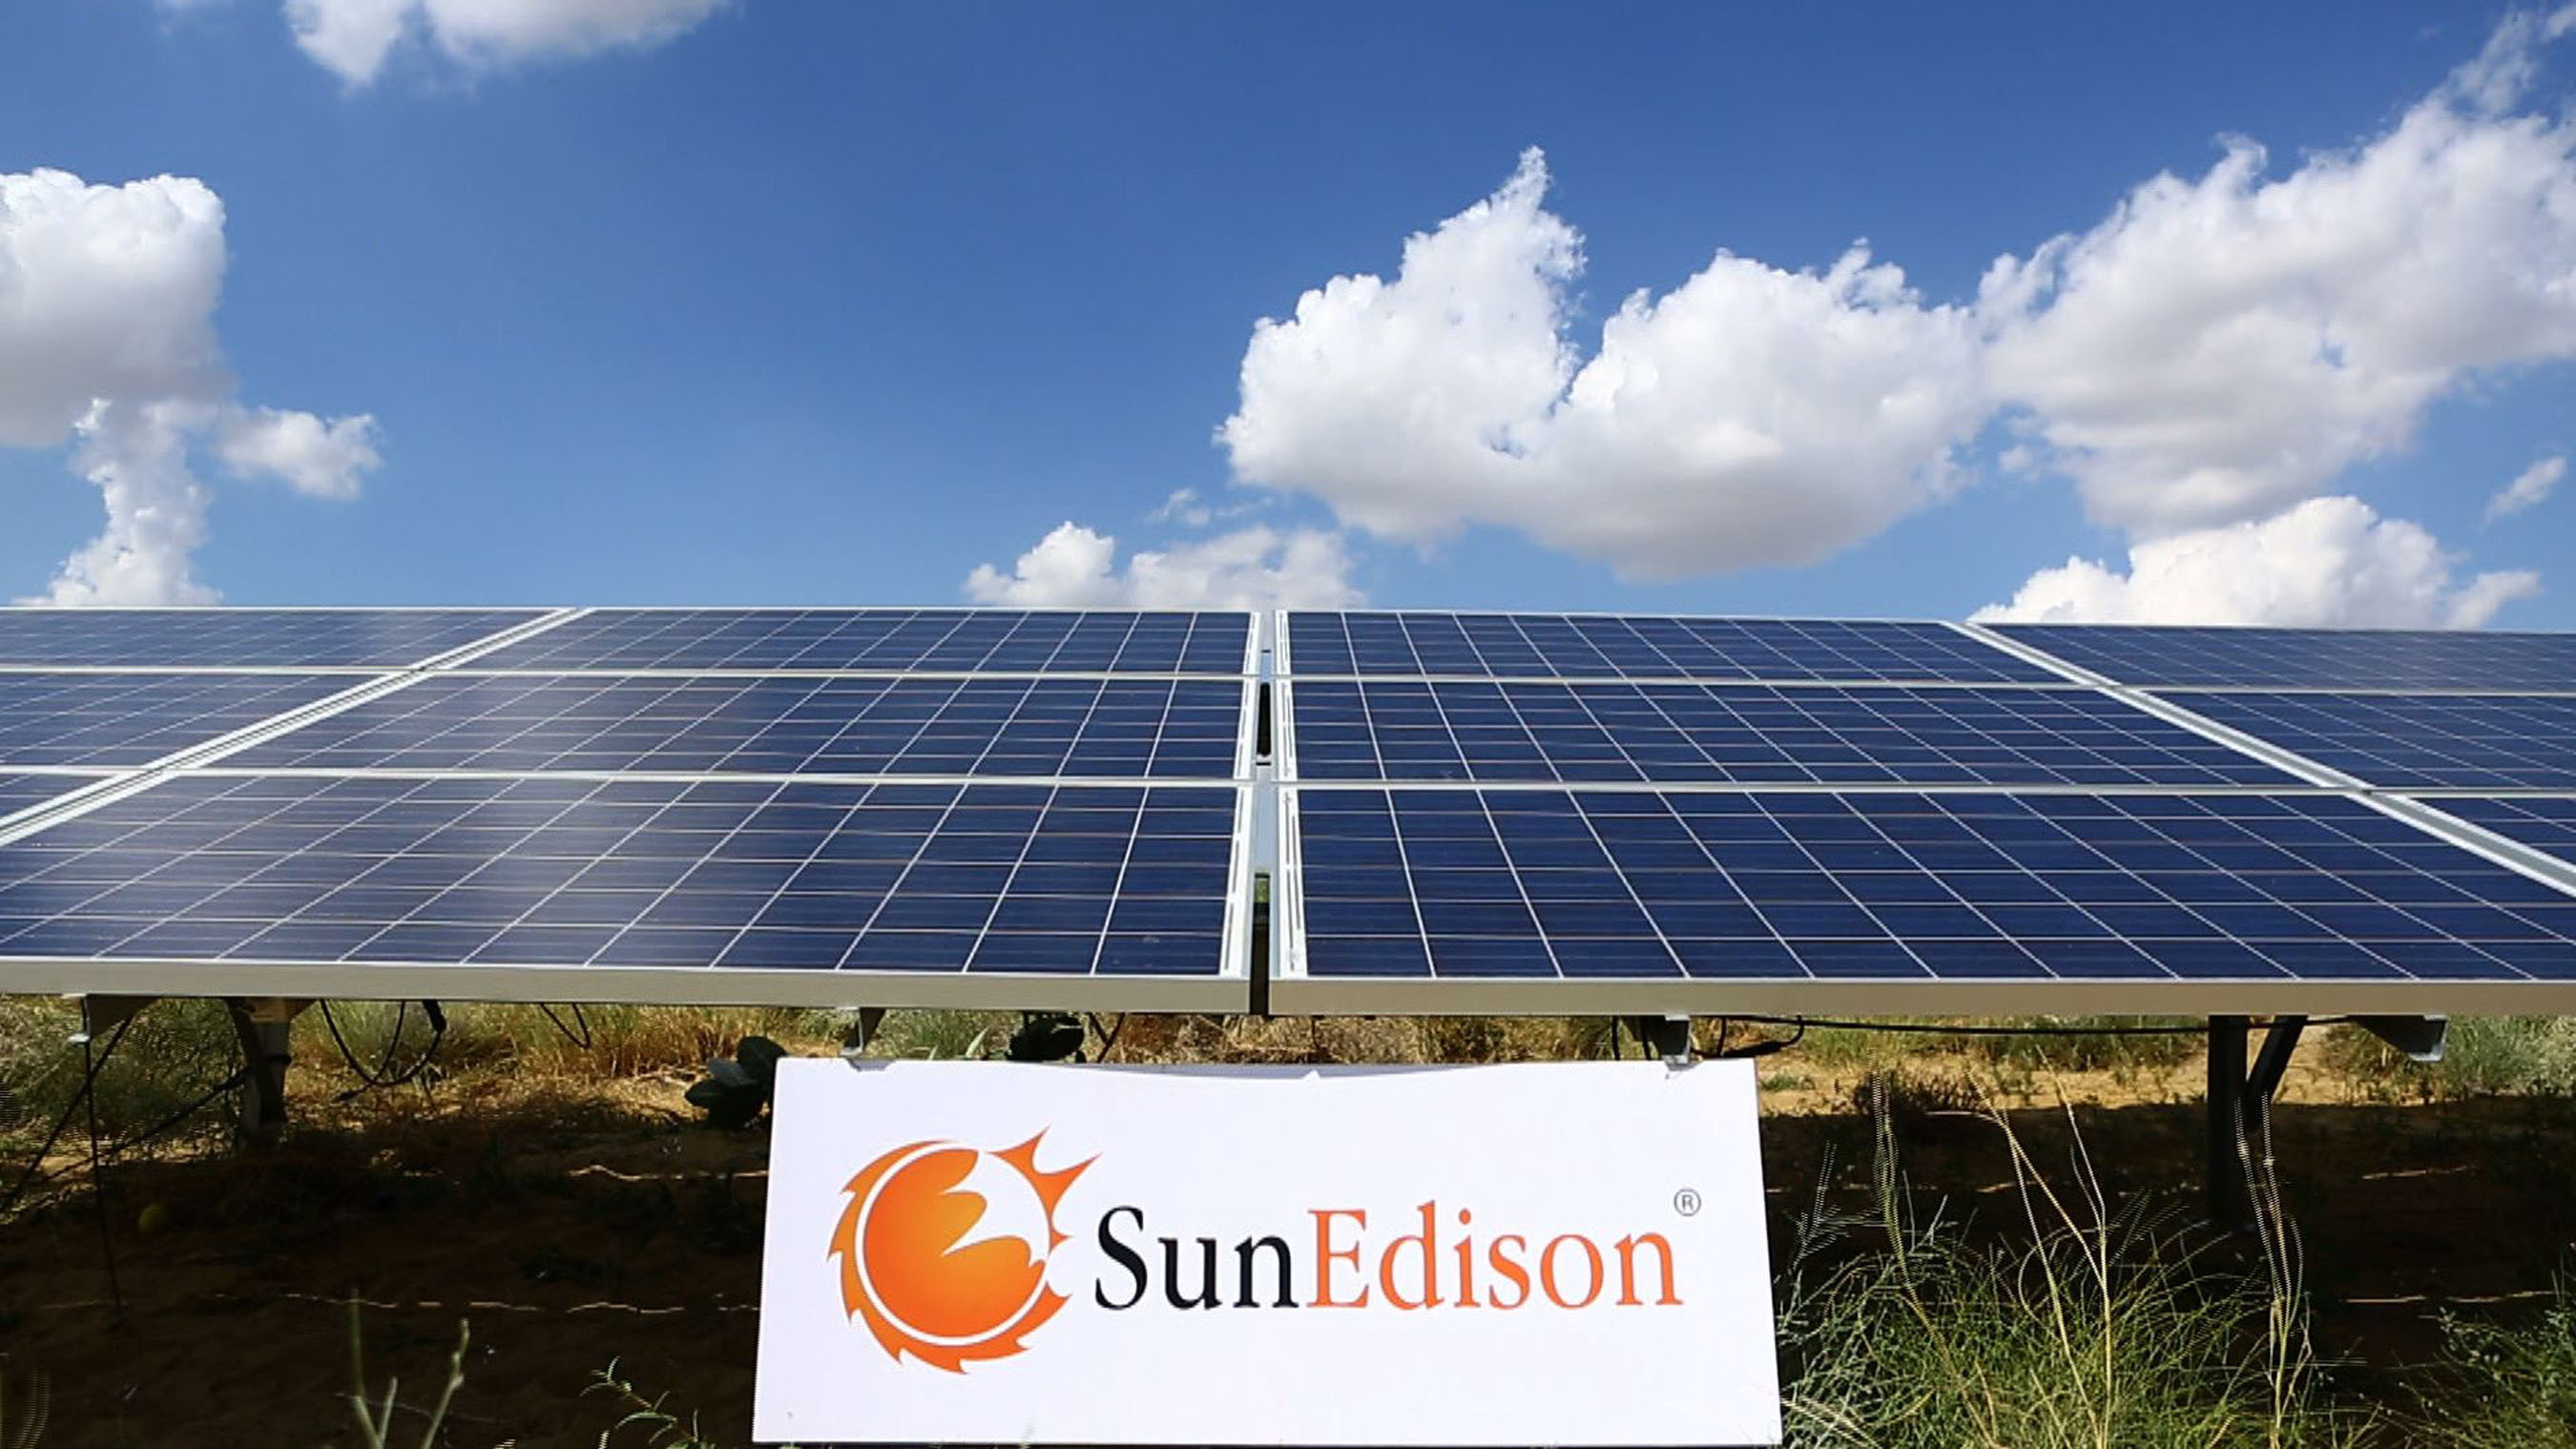 Solar Panels Power SunEdison Solar Water Pumps which help farmers in India increase crop yield and improve food security. (PRNewsFoto/SunEdison) (PRNewsFoto/SUNEDISON)